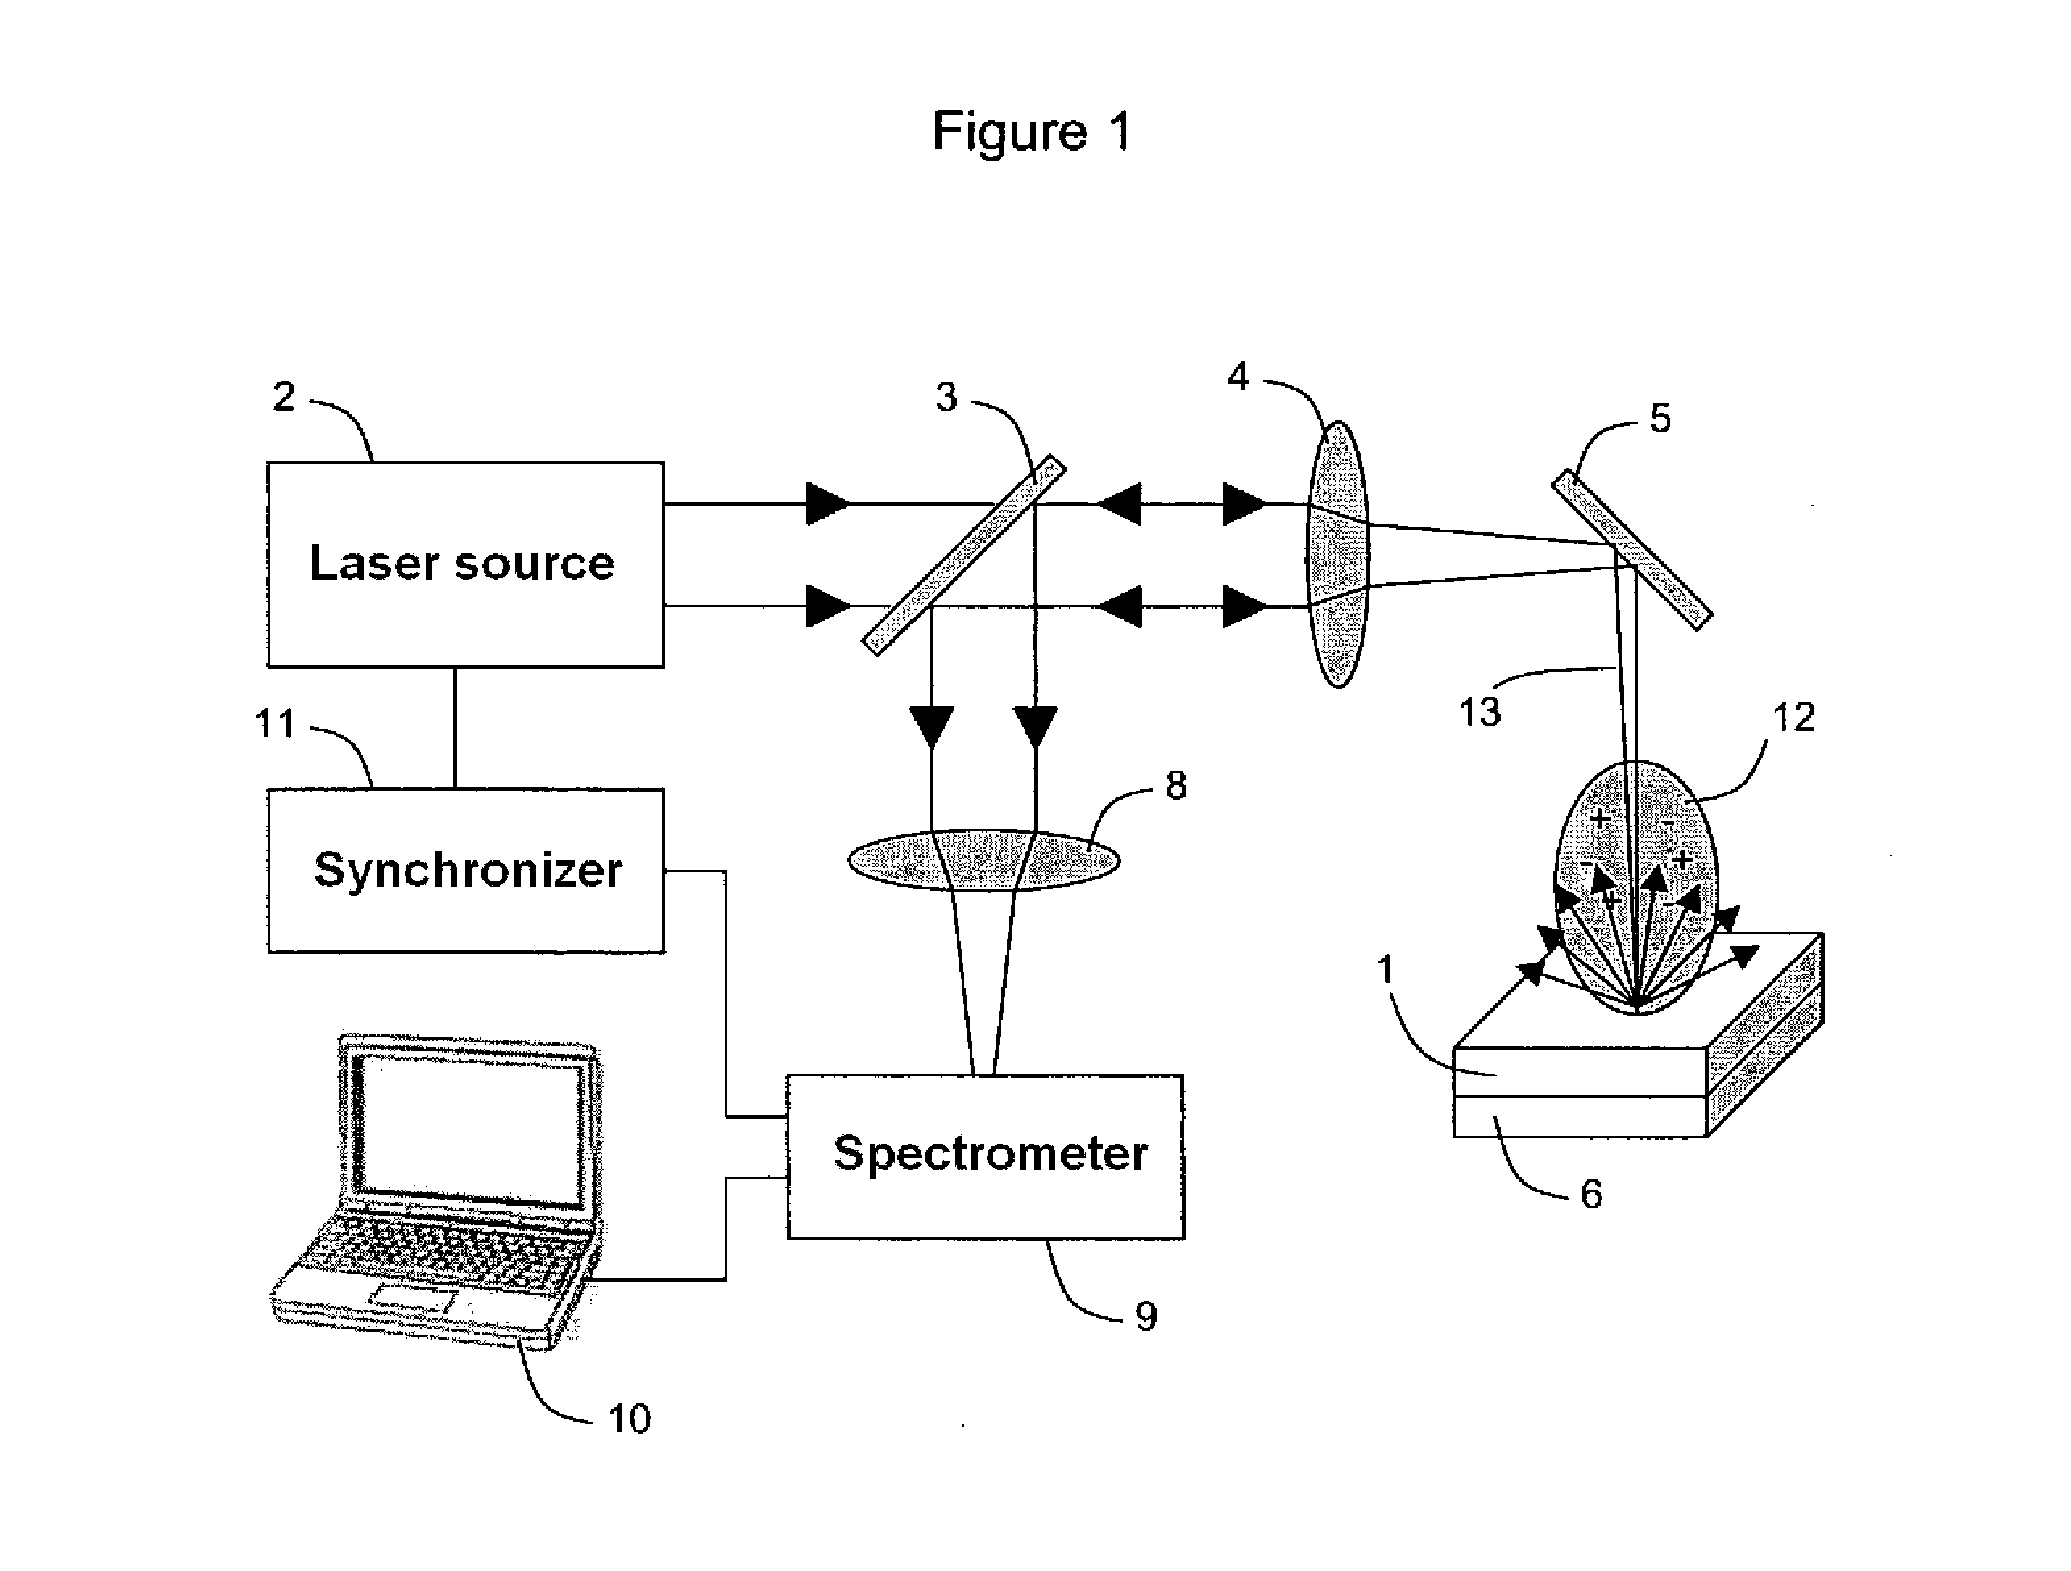 System and method for quantitative analysis of the elemental composition of a material by laser-induced breakdown spectroscopy (LIBS)